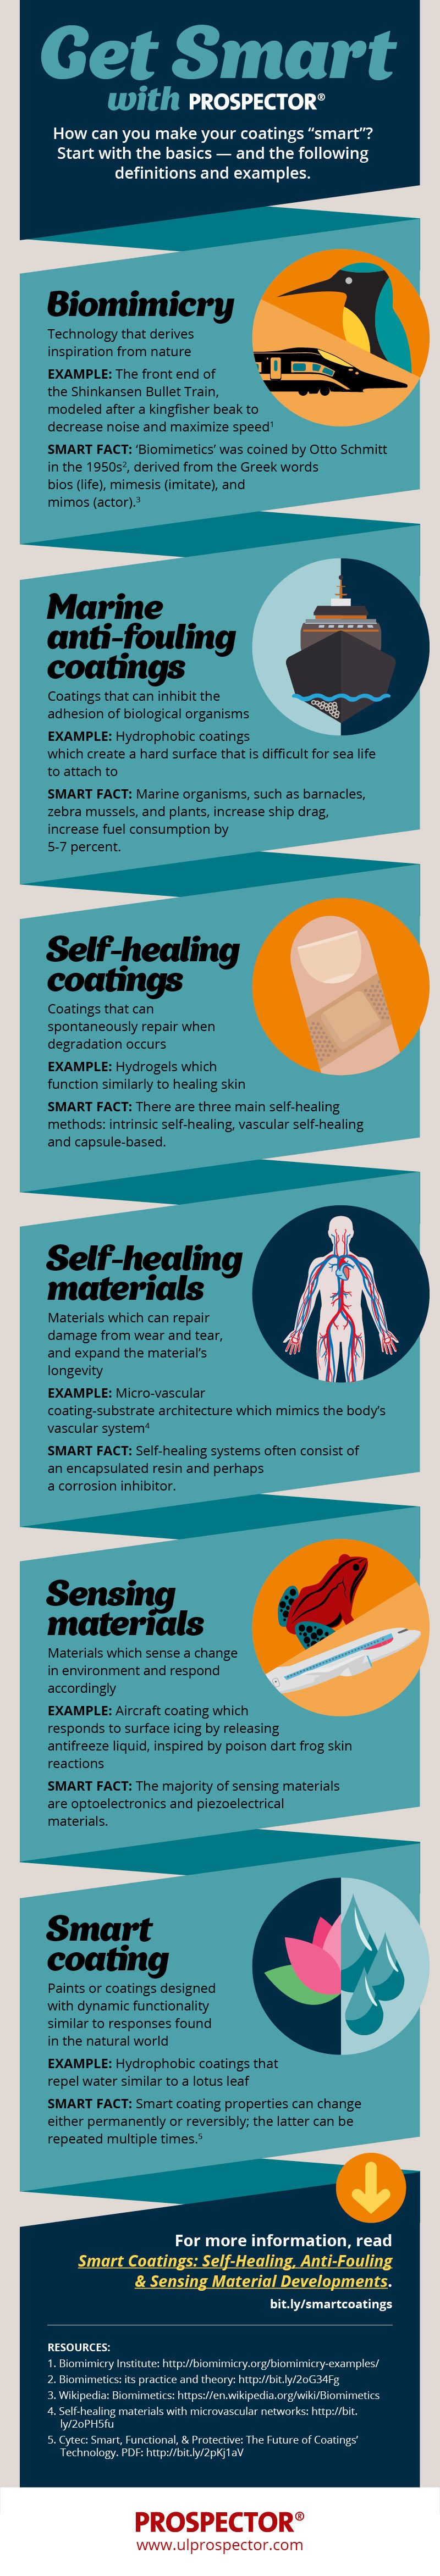 Smart Coatings glossary - this infographic explains some of the core concepts critical to the formulation of coatings that adjust and adapt to their environment. Learn more in the Prospector Knowledge Center.